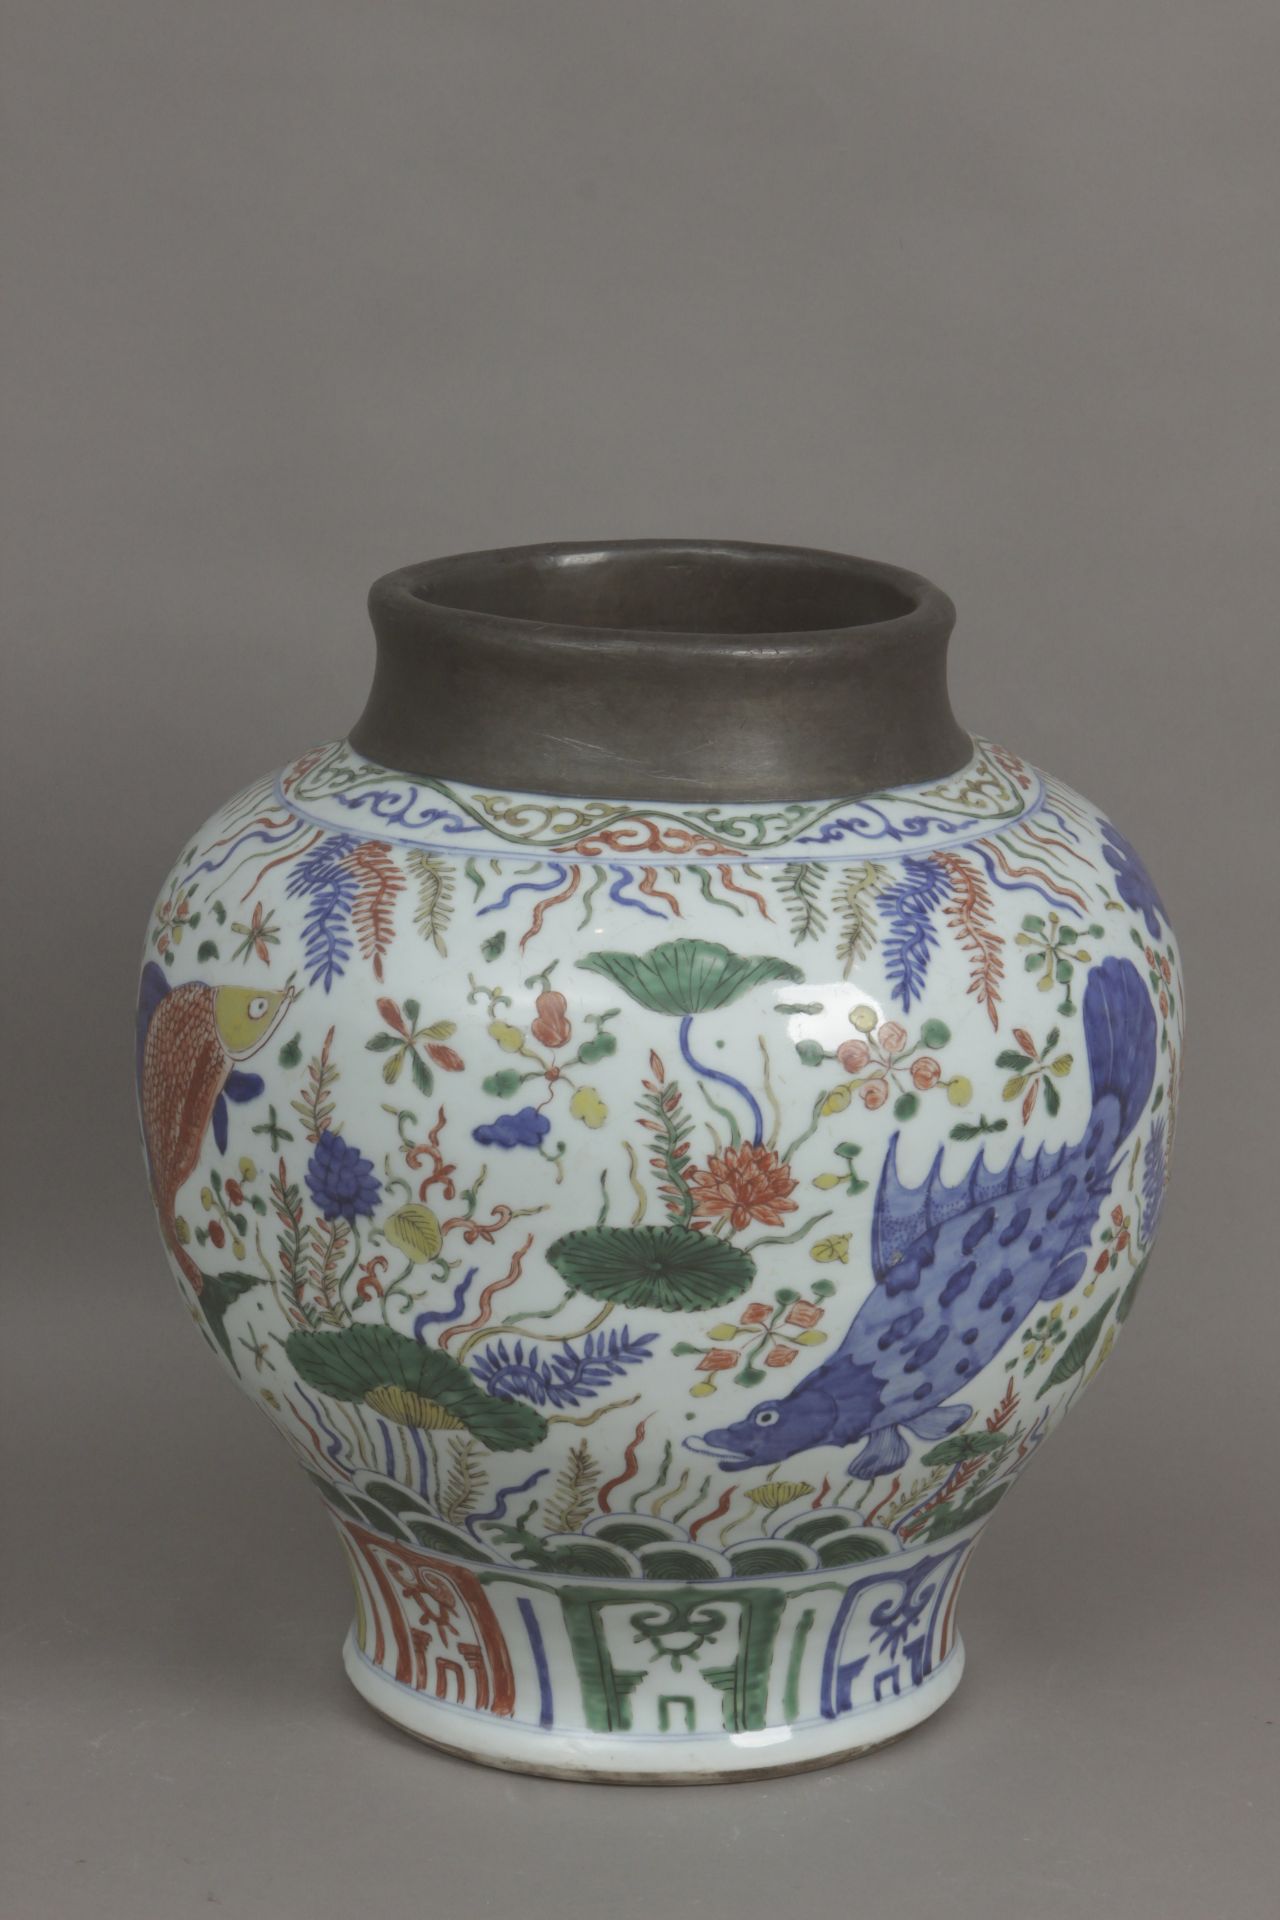 An early 20th century Chinese vase in Doucai porcelain - Image 4 of 5